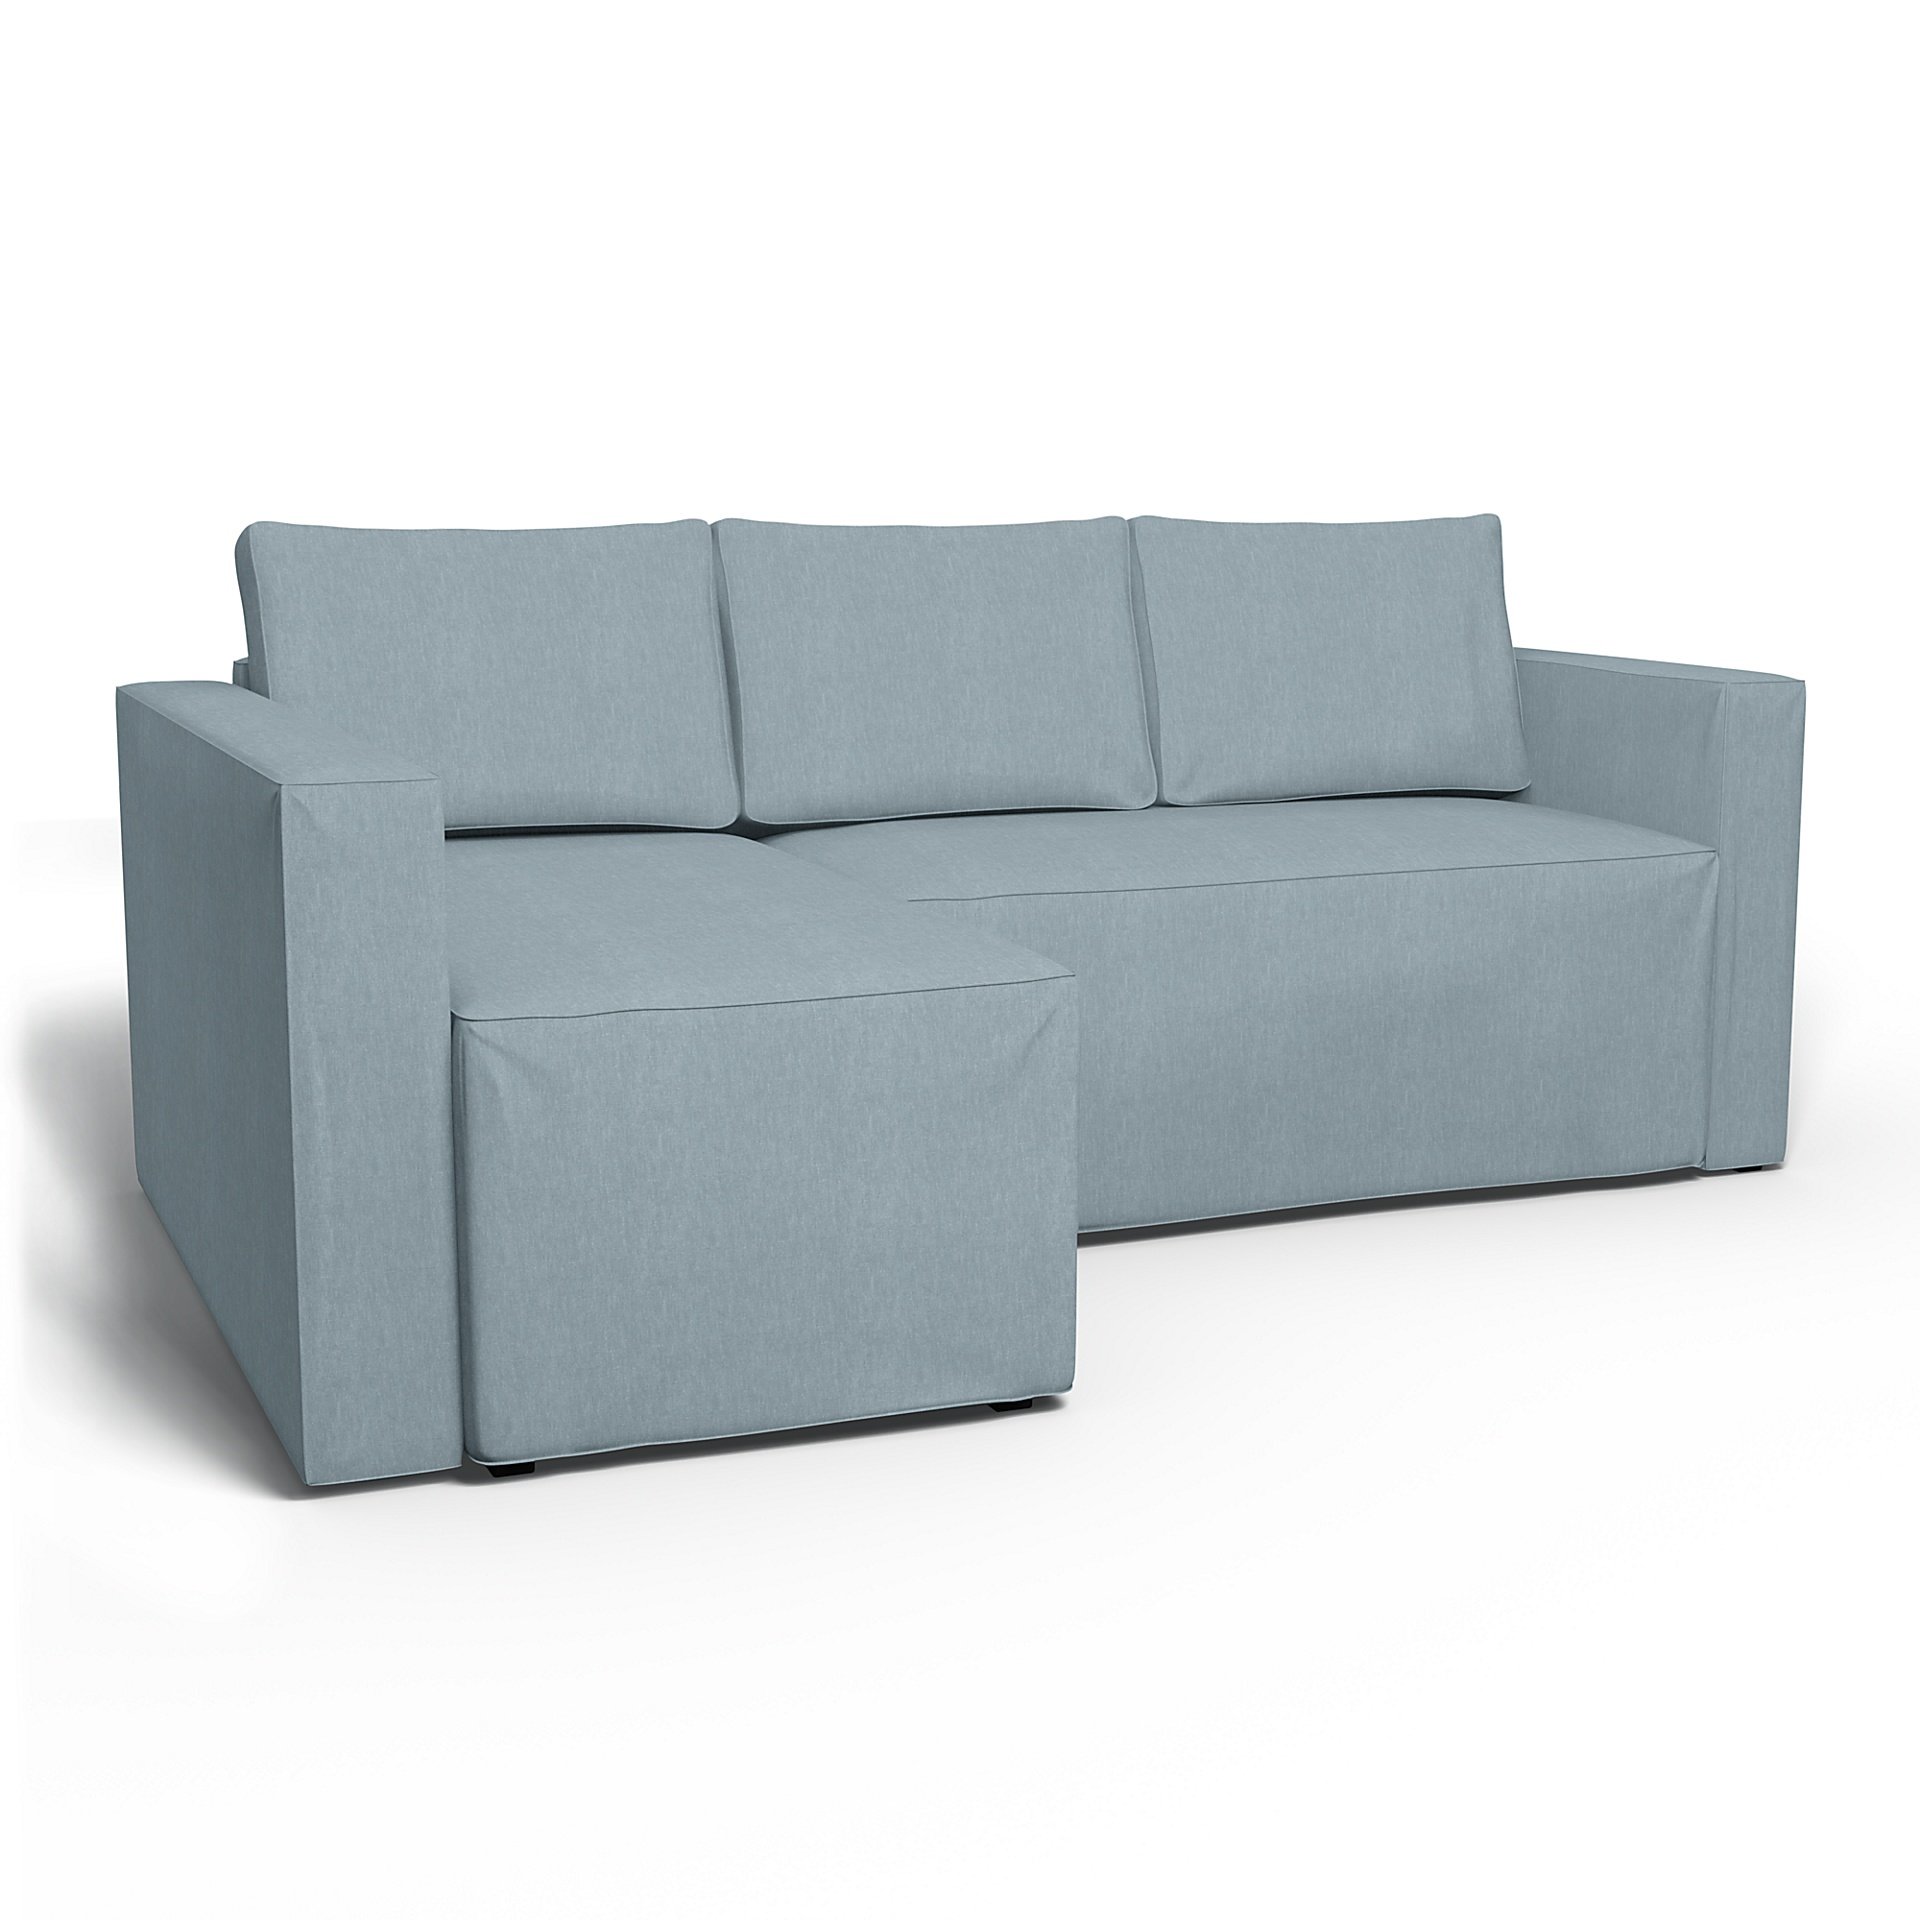 IKEA - Manstad Sofa Bed with Left Chaise Cover, Dusty Blue, Linen - Bemz